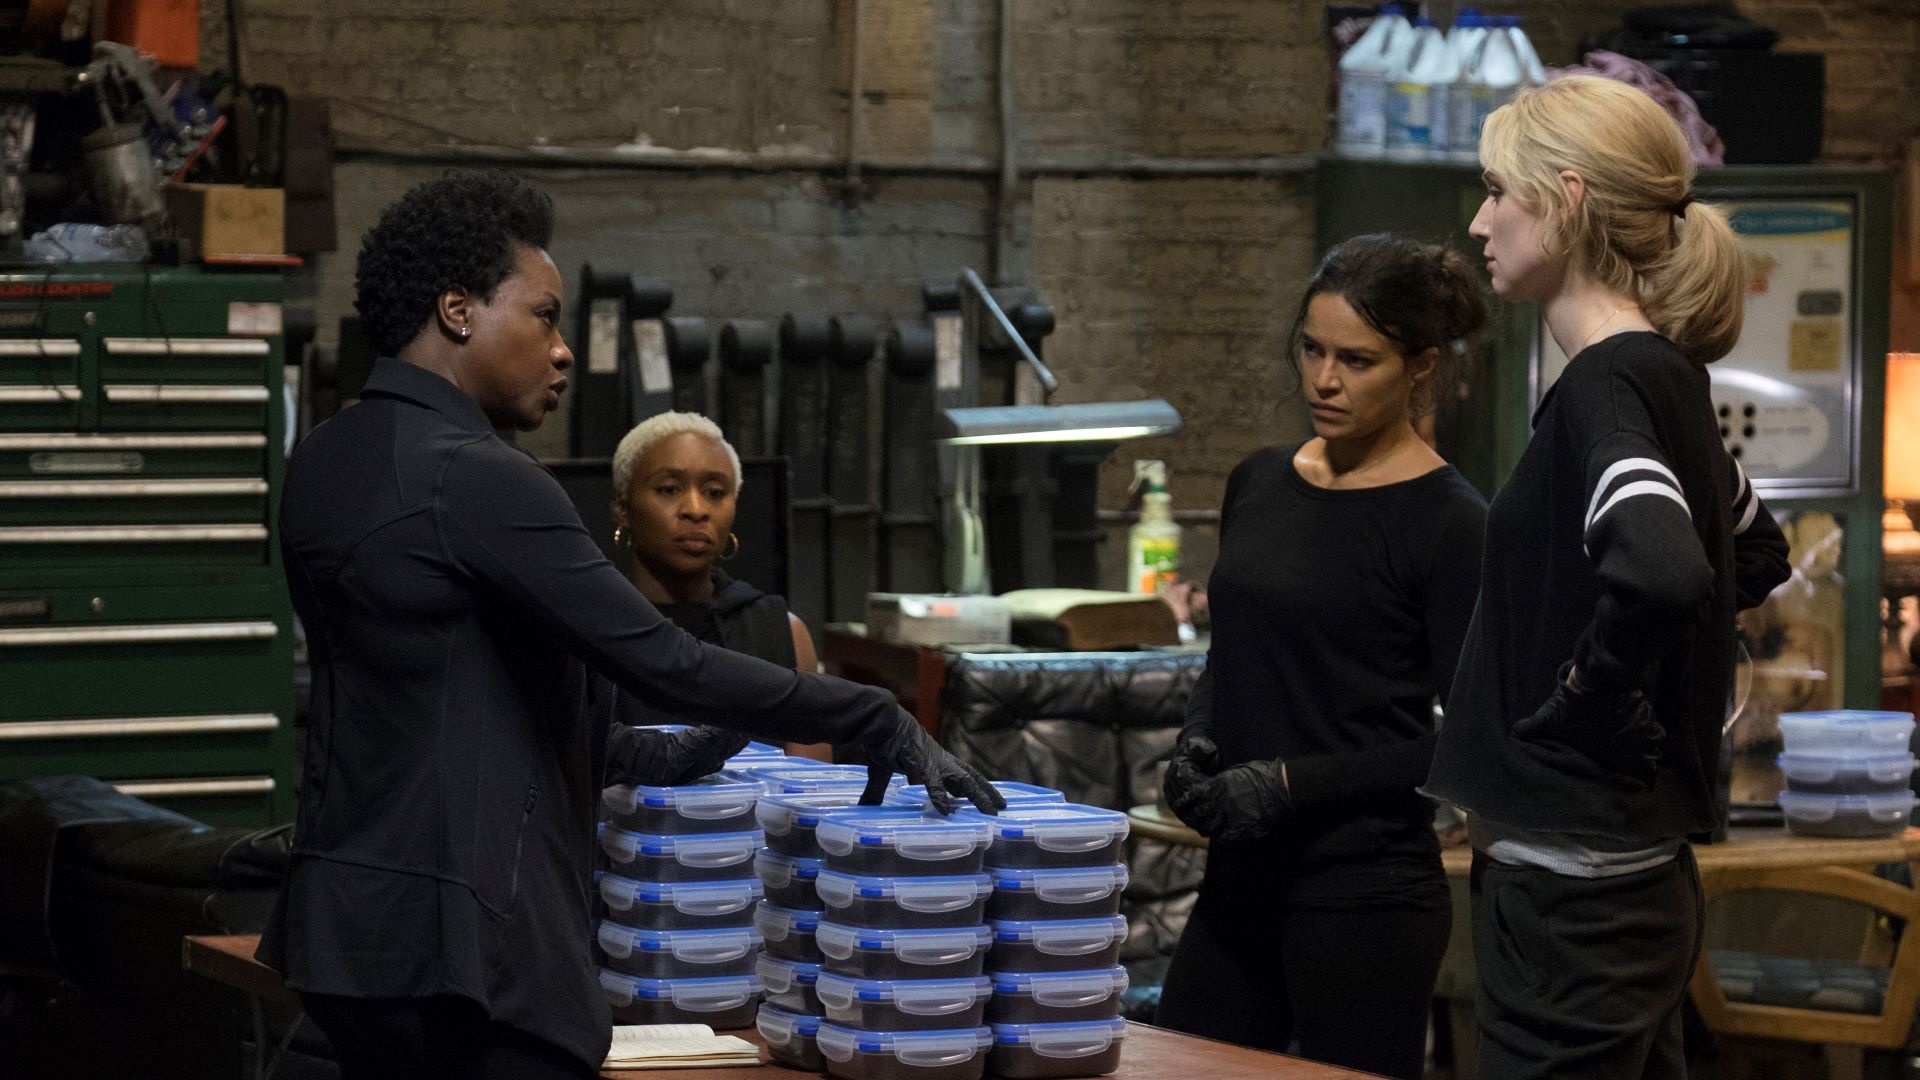 Widows (2018) Movie, Now available, On demand streaming, 1920x1080 Full HD Desktop